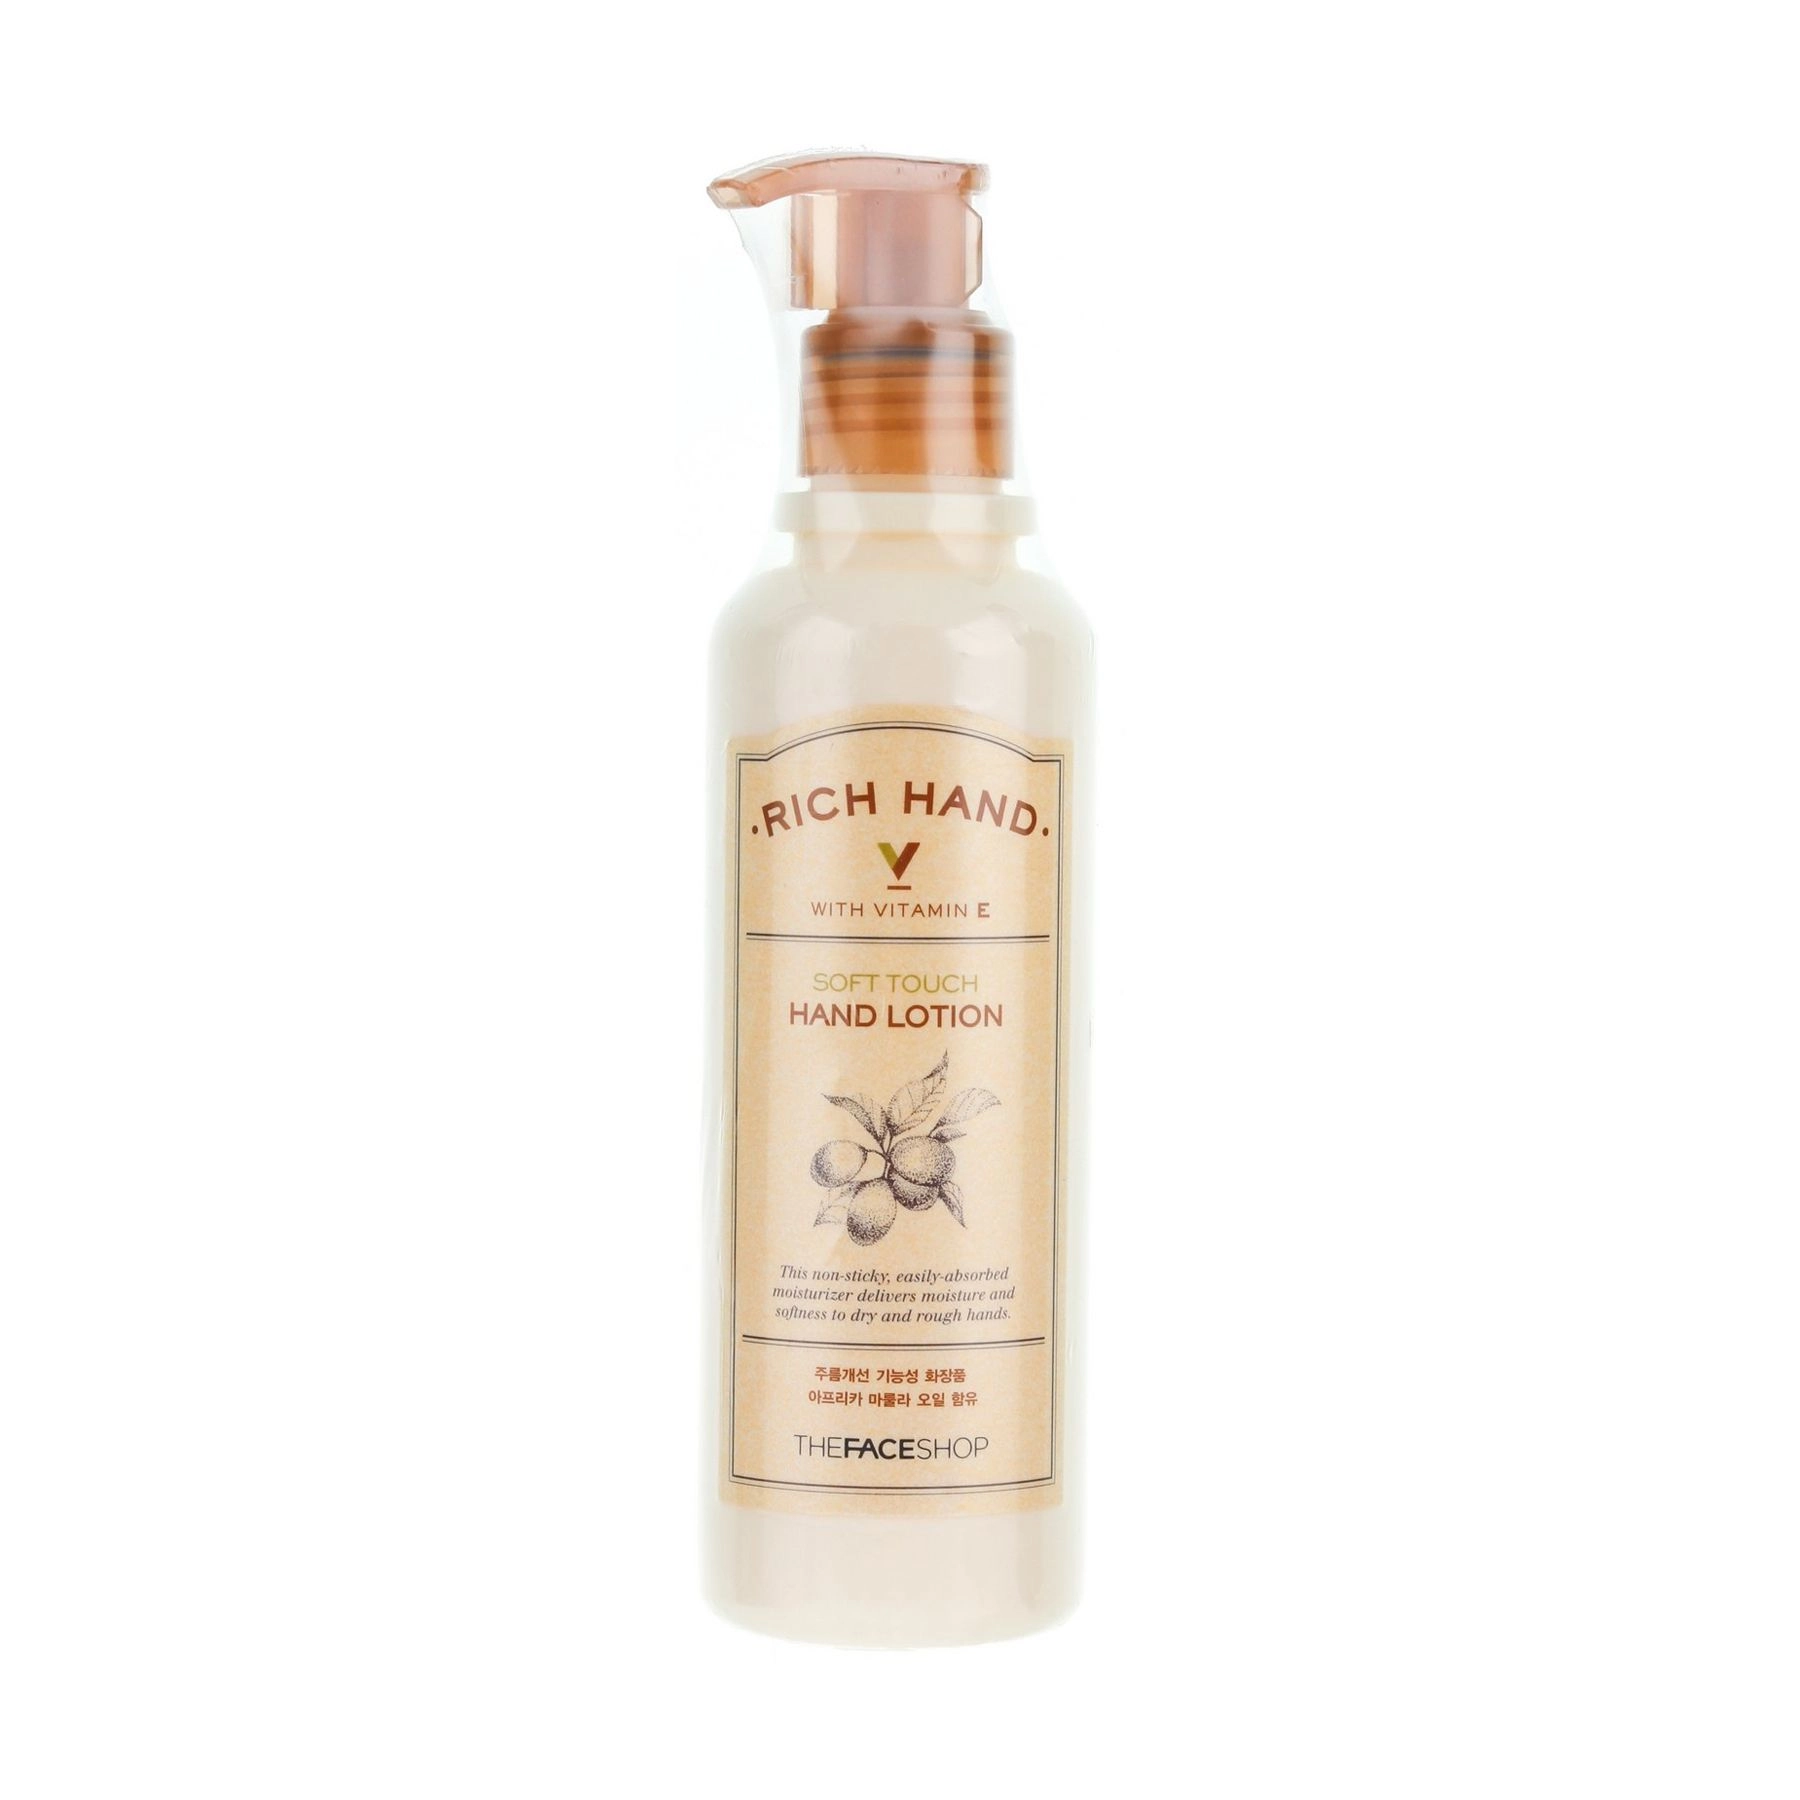 The Face Shop Лосьон для рук Rich Hand V Soft Touch Hand Lotion с маслом марулы, 200 мл - фото N1